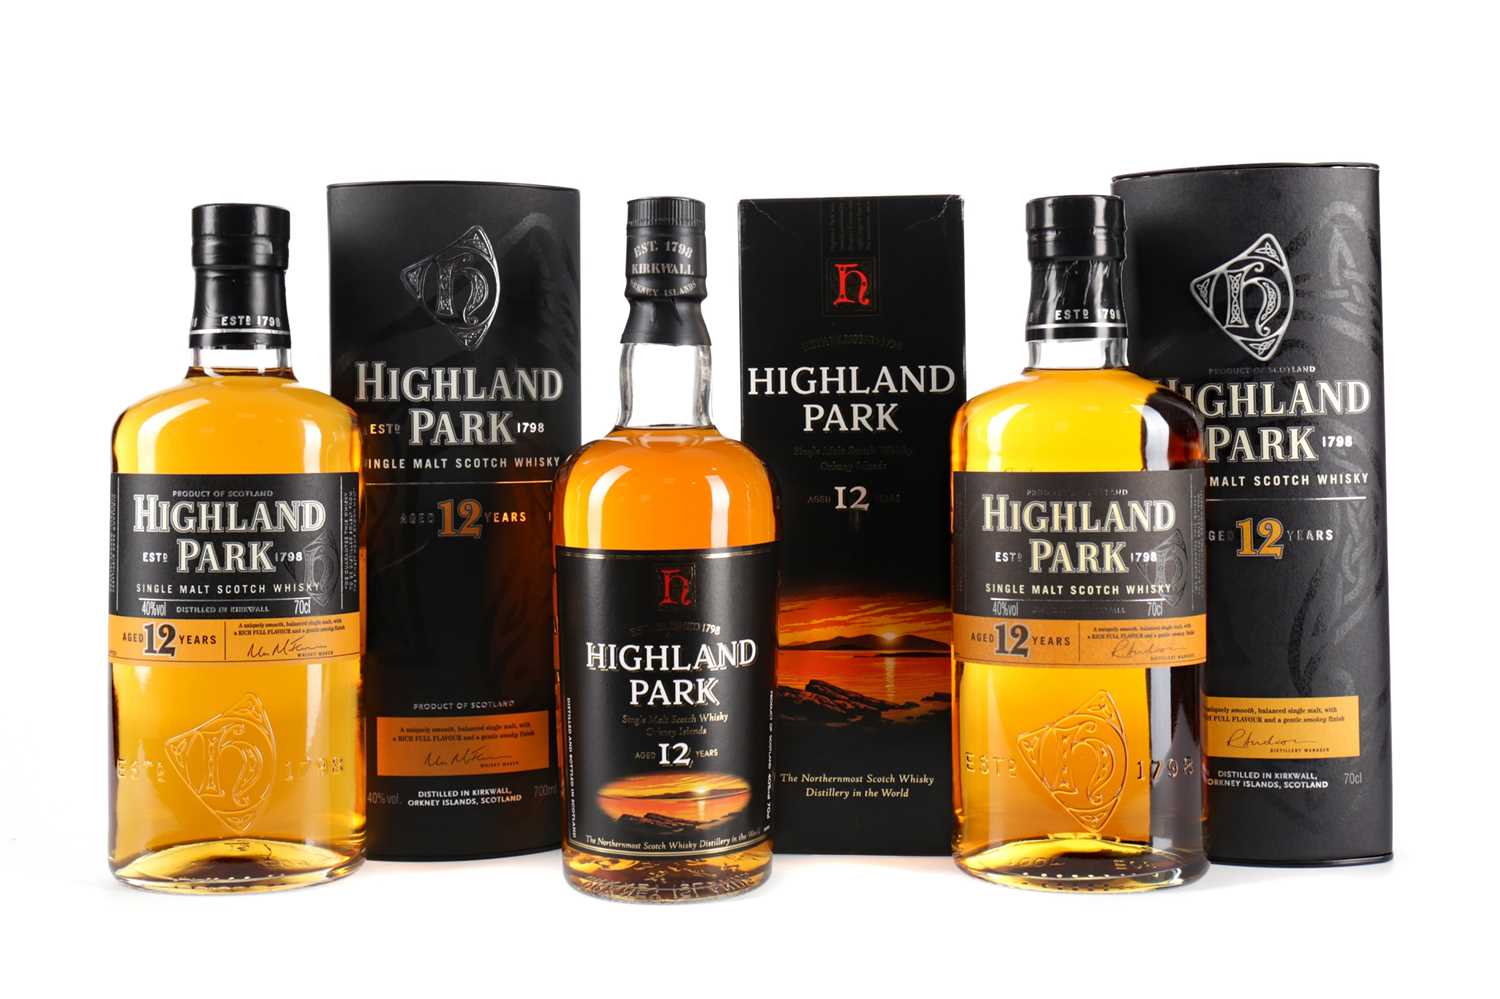 Lot 24 - THREE BOTTLES OF HIGHLAND PARK AGED 12 YEARS